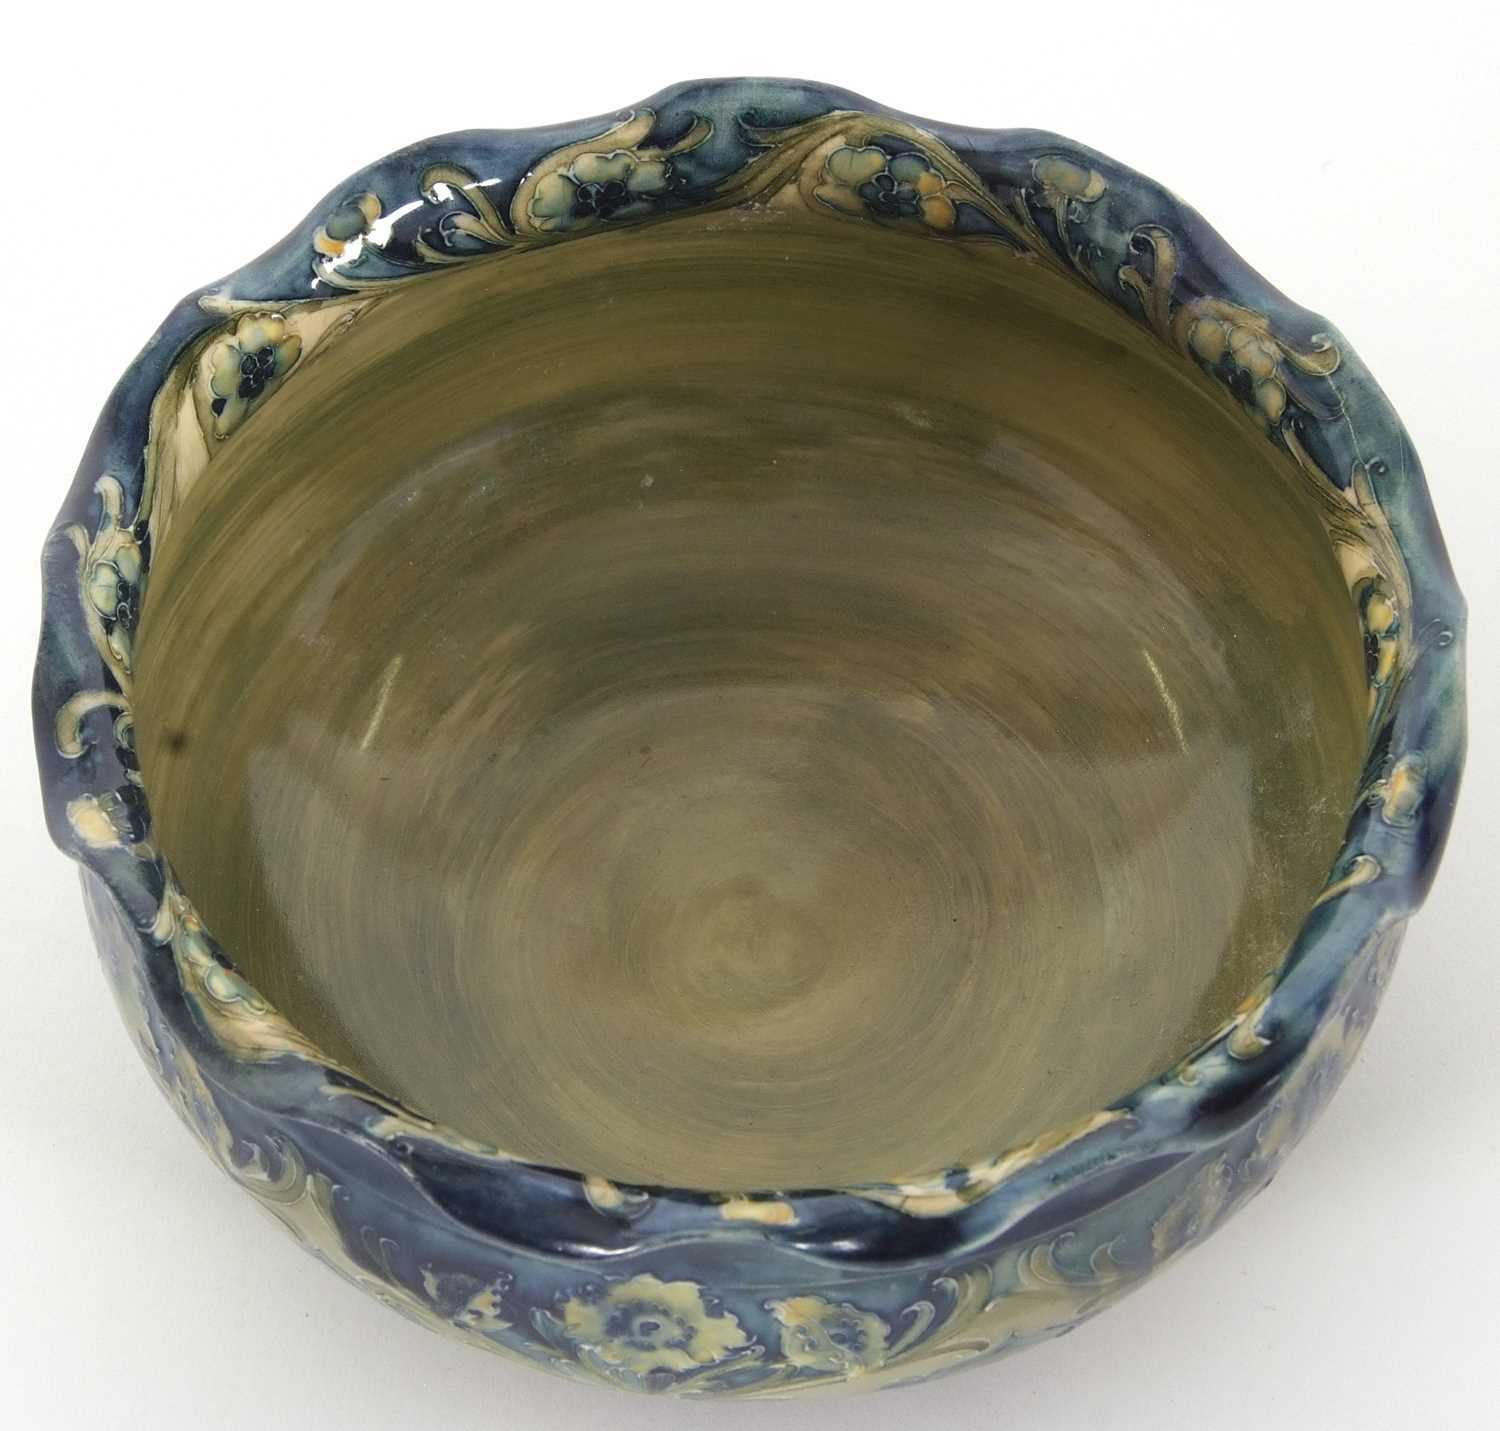 A Moorcroft Florian ware bowl made for Liberty with a Art Nouveau stylised floral design in green - Image 7 of 11